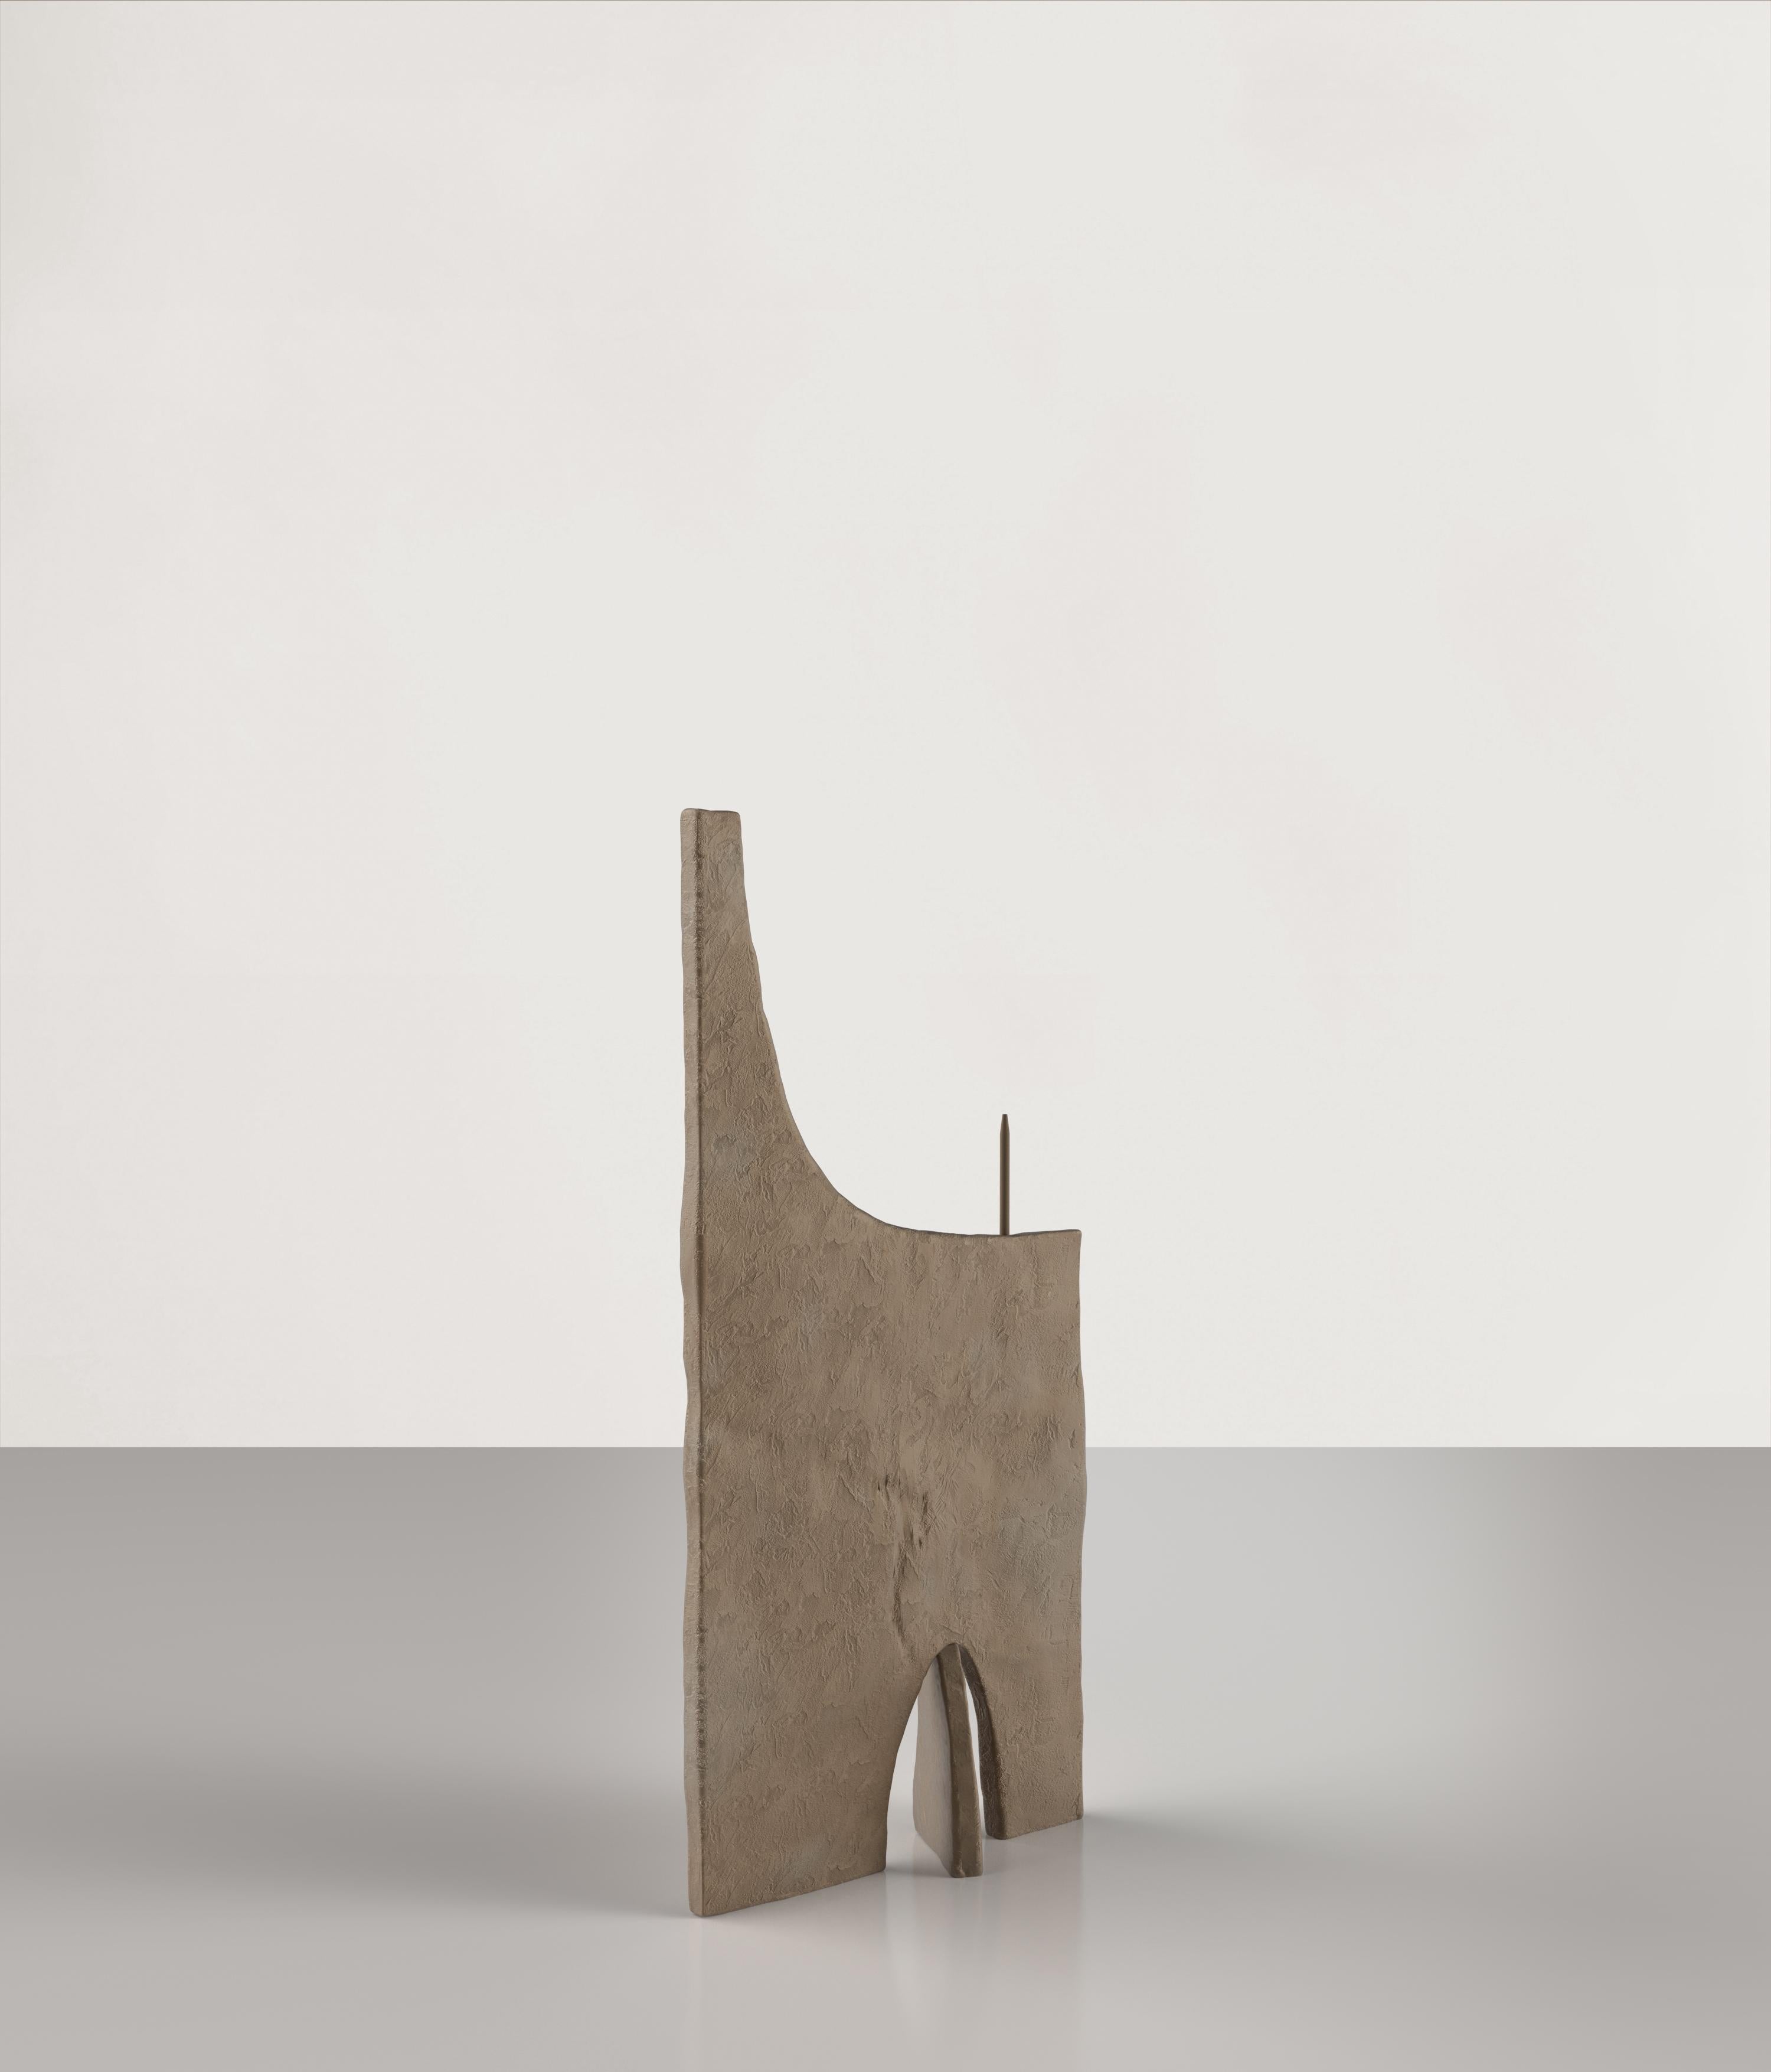 Ouble V2 is a 21st Century candle holder made by young Italian artists in a brown bronze patina. It is part of the collectible design language Ouble that has been developed by the Edizione Limitata's art research team in Milan. The exploration that